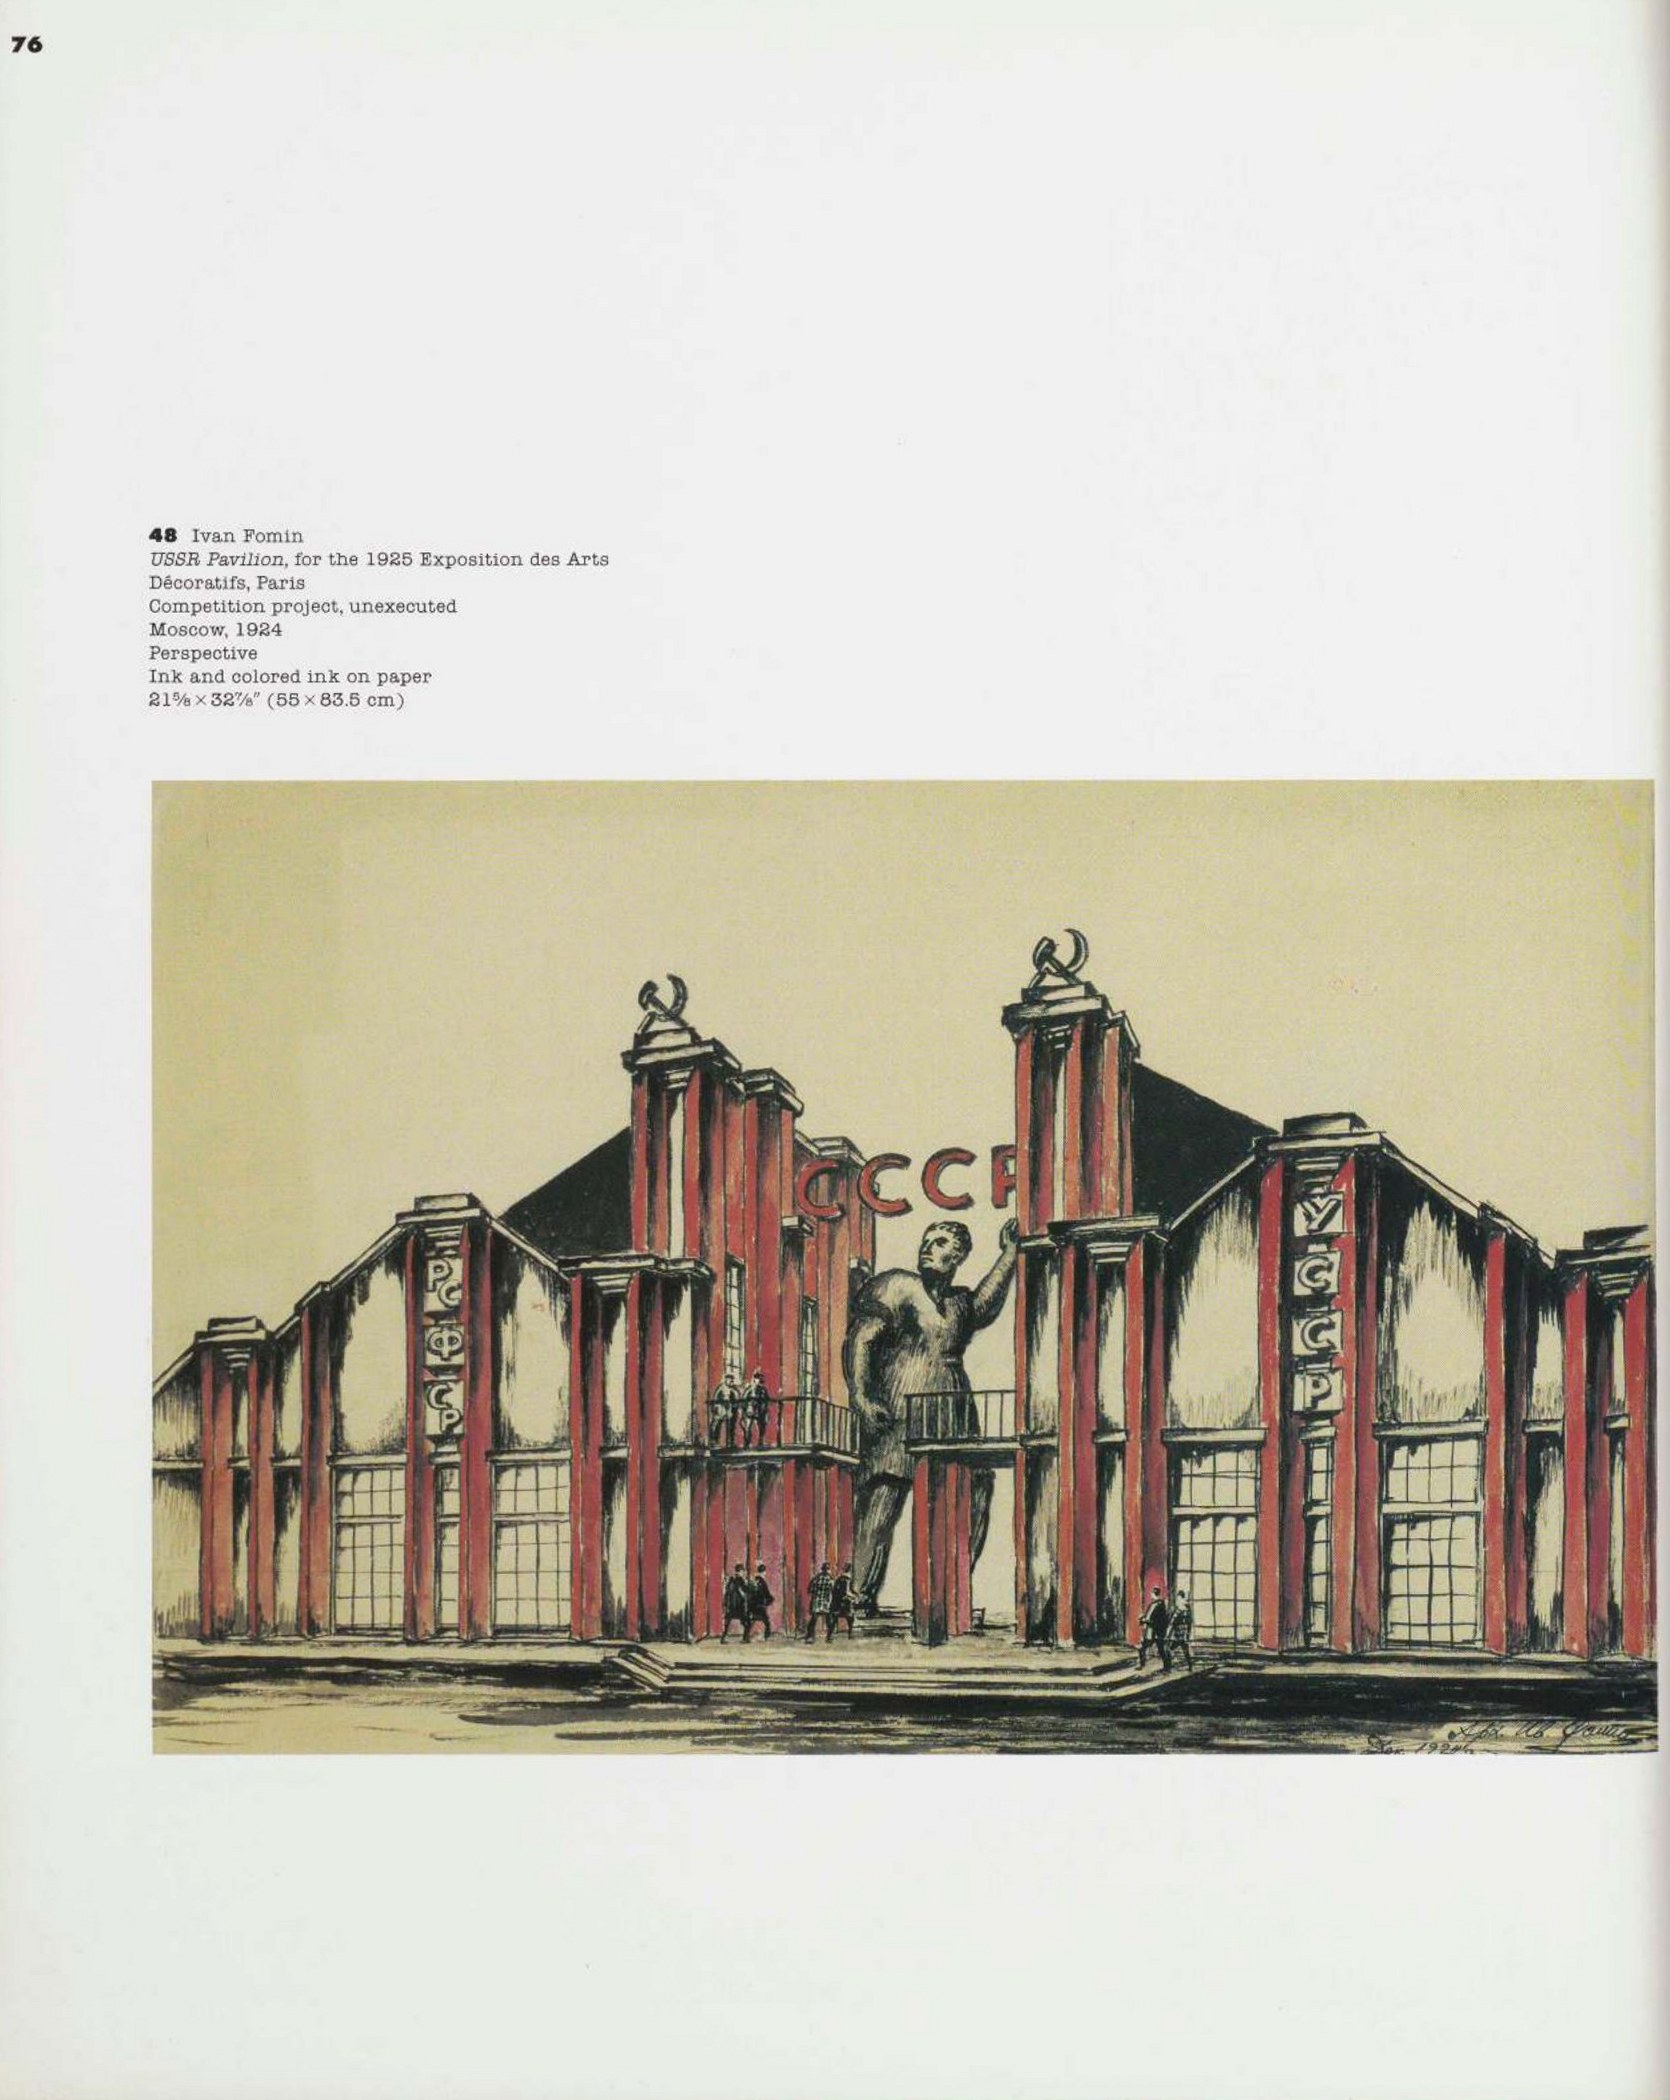 Architectural drawings of the Russian architectural avant-garde / Еssay by Catherine Cooke. — New York : The Museum of Modern Art, 1990